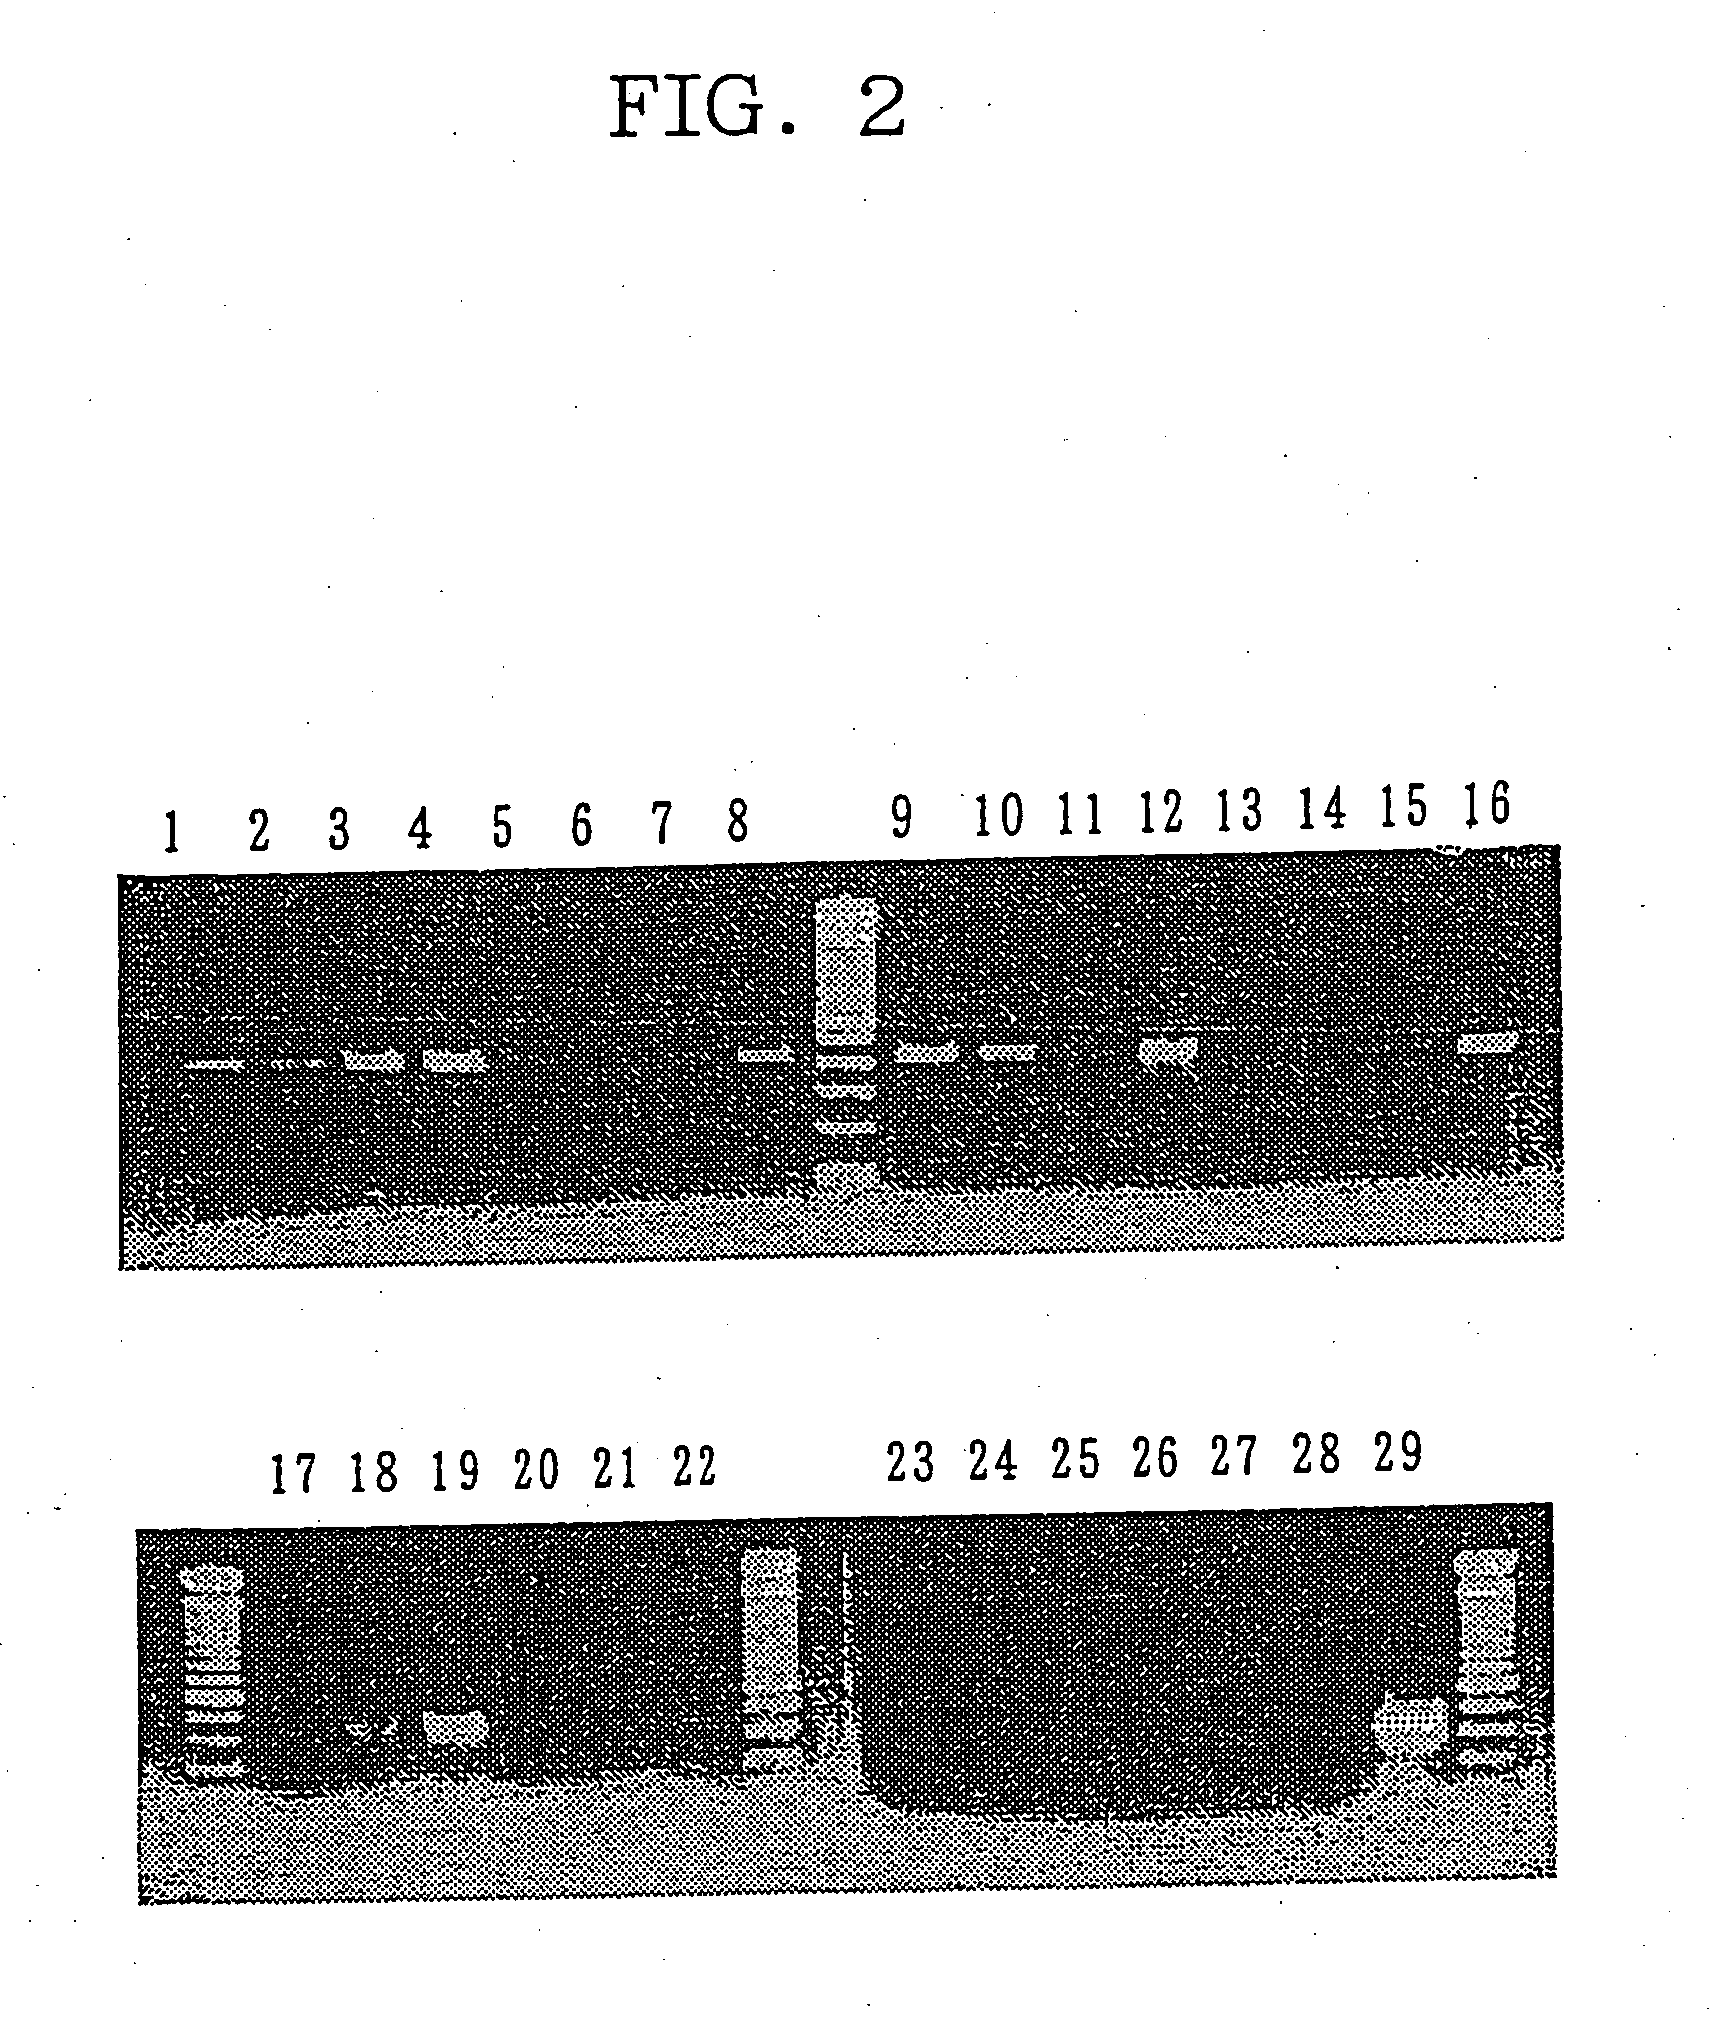 Novel insulin/IGF/relaxin family polypeptides and DNAs thereof